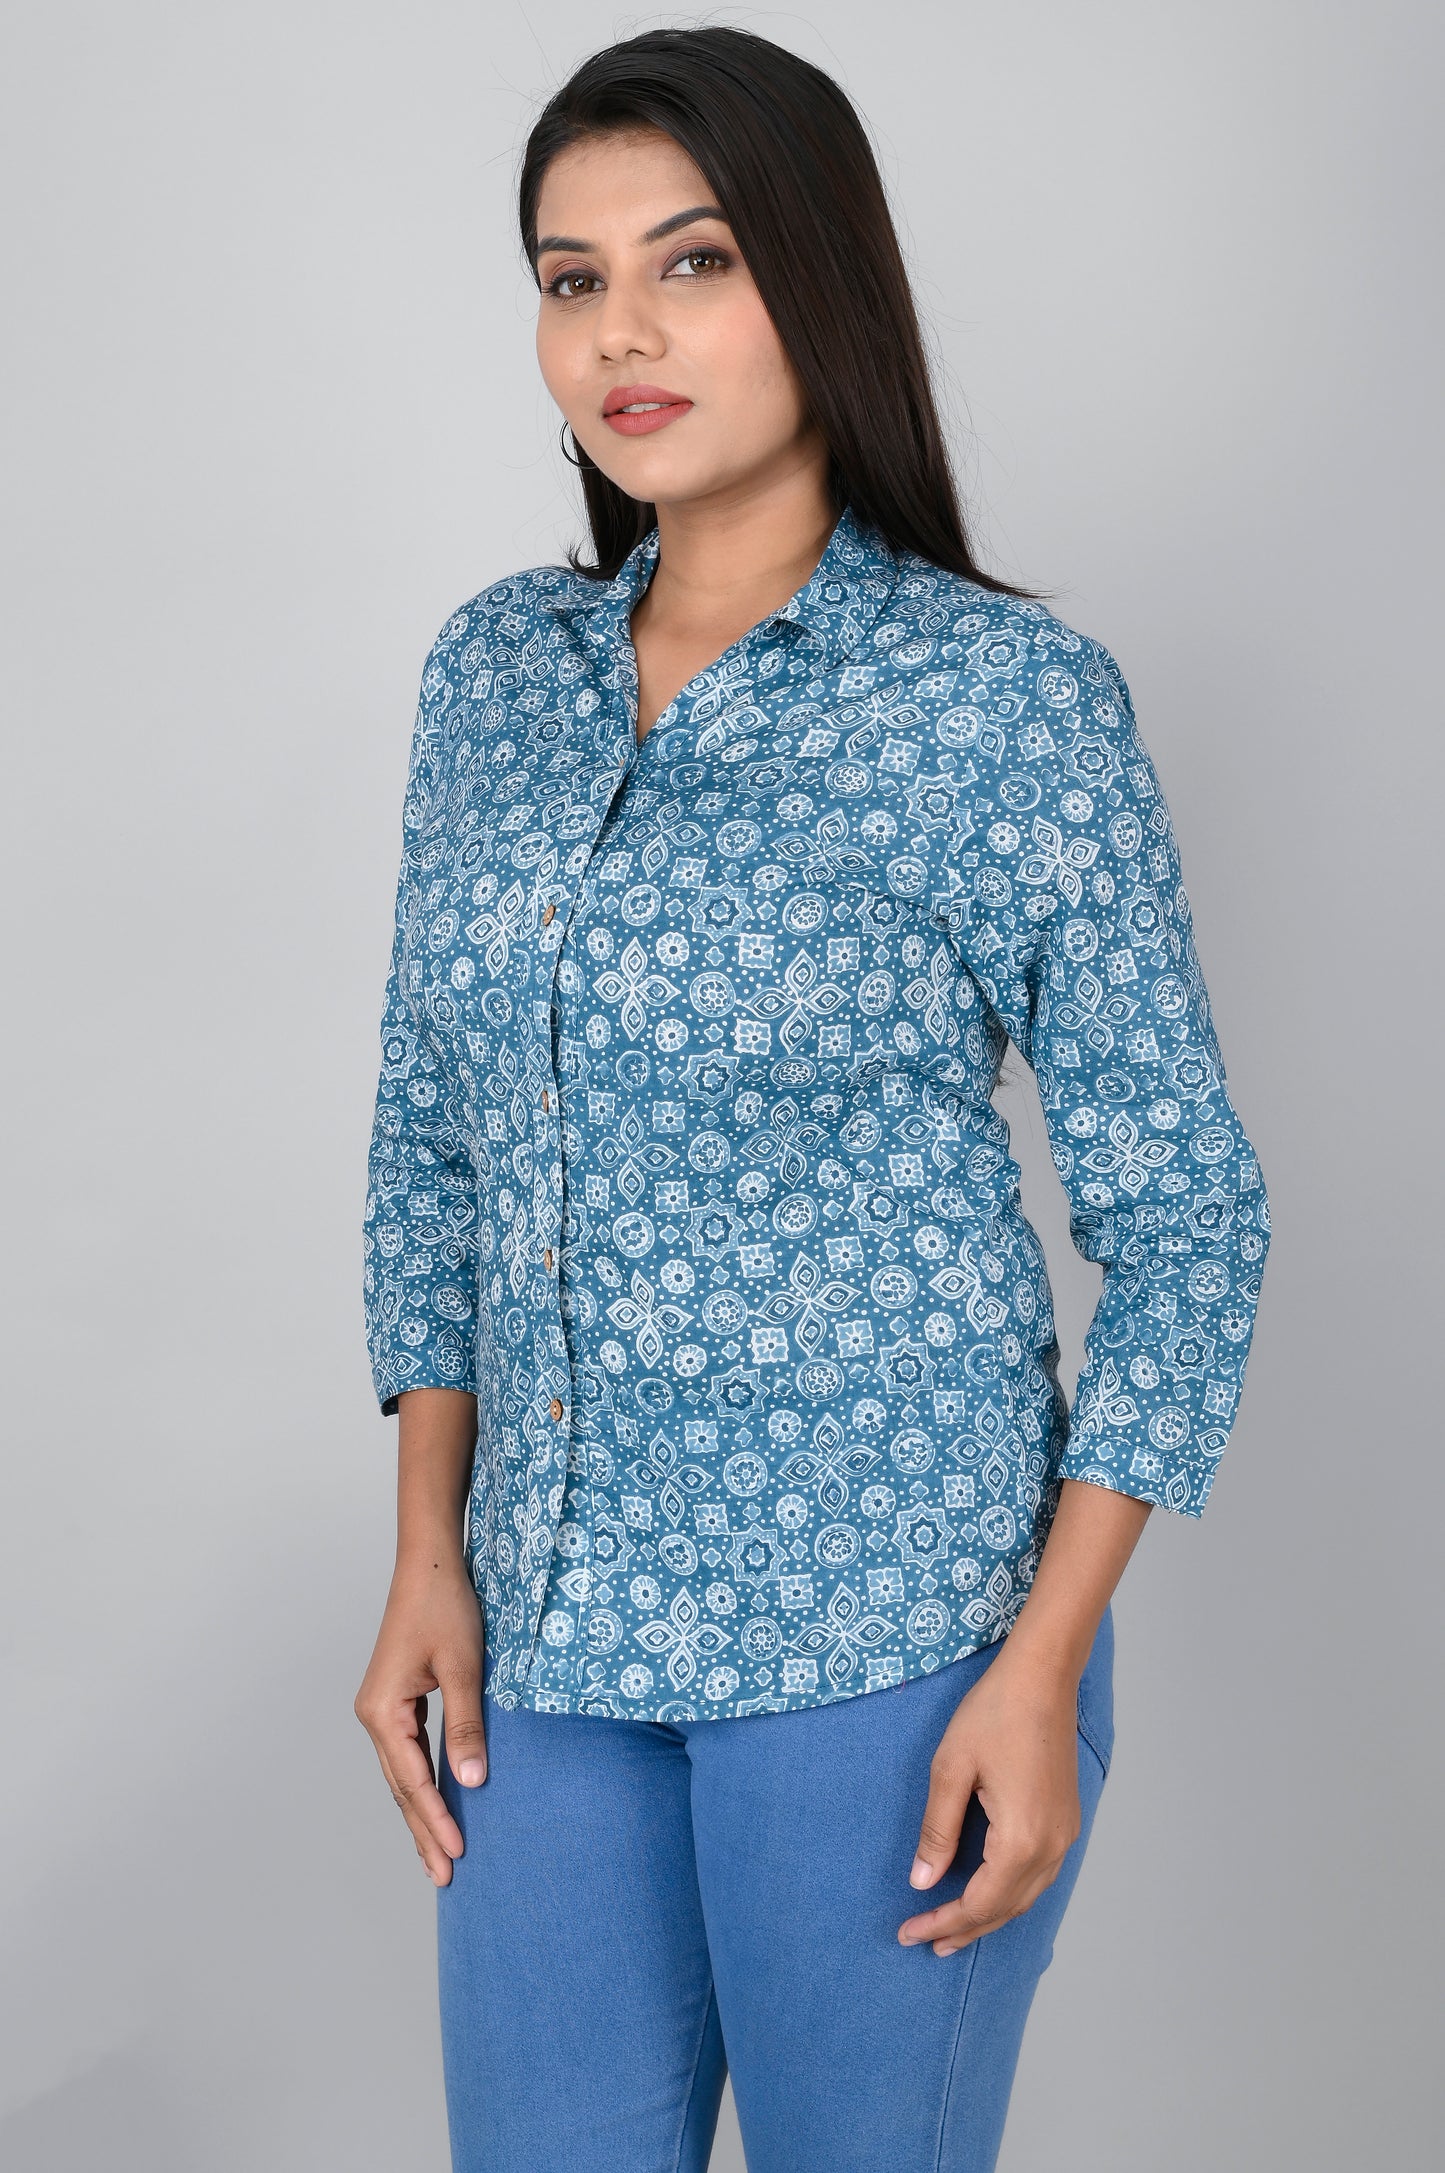 Women's Ethnic floral Printed Shirts